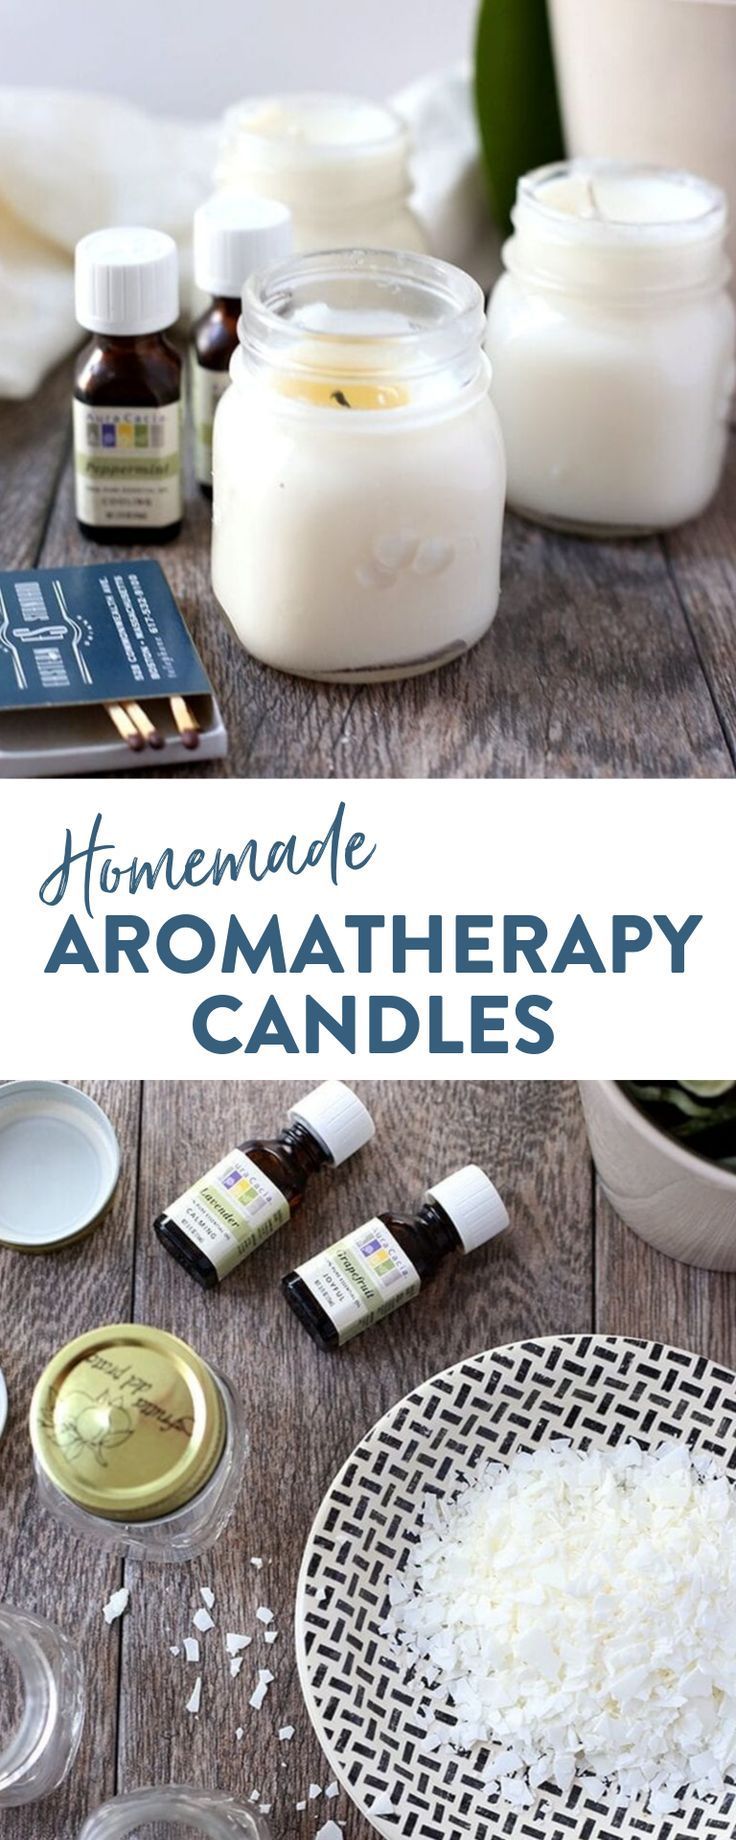 Homemade Aromatherapy Candles - The Healthy Maven - Homemade Aromatherapy Candles - The Healthy Maven -   12 diy Candles aromatherapy ideas